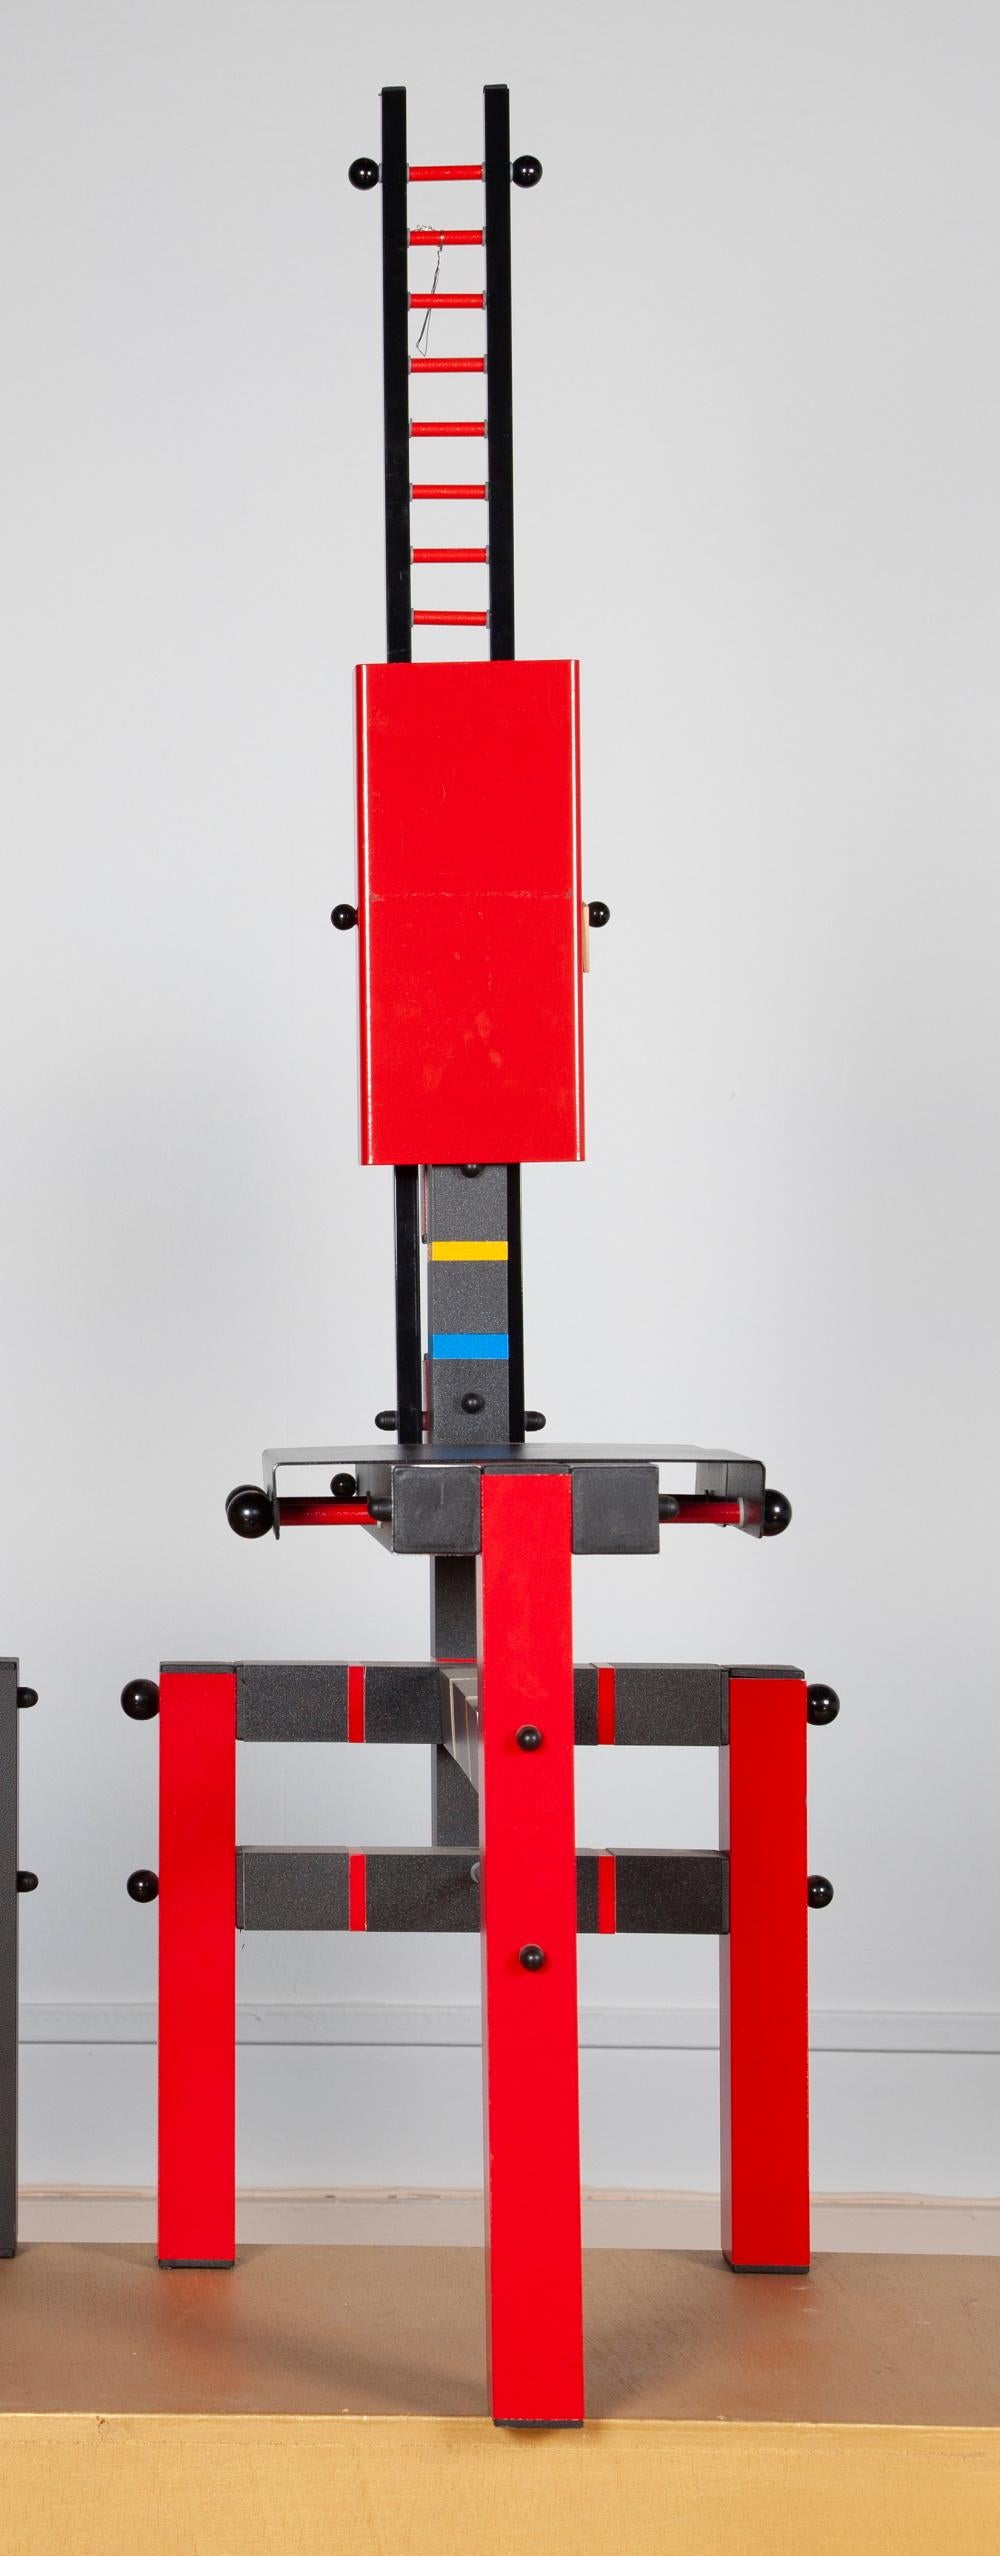 Lego red-black chair
Work from the 1980s
Metal, wood 
Measures: H: 132 cm, W: 44 cm, D: 47 cm.